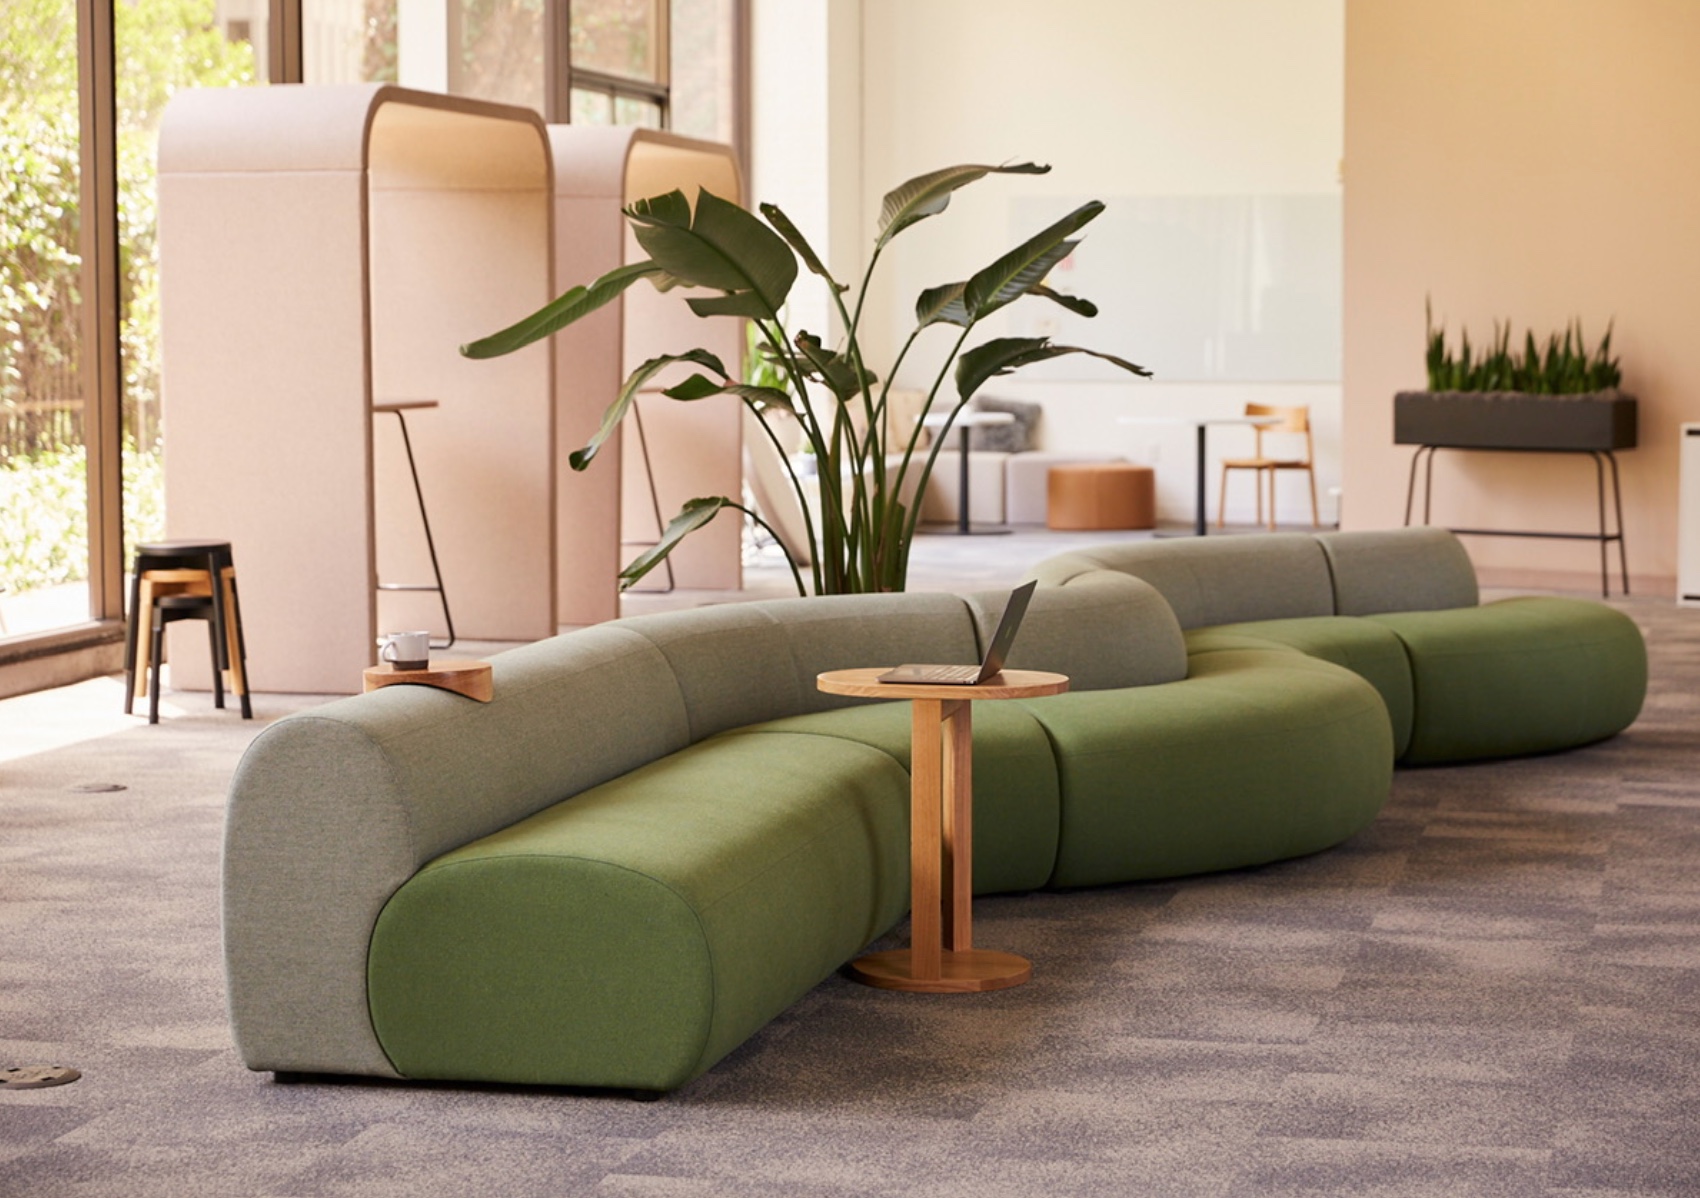 Logger Modular Seating from Allsteel and Corral USA